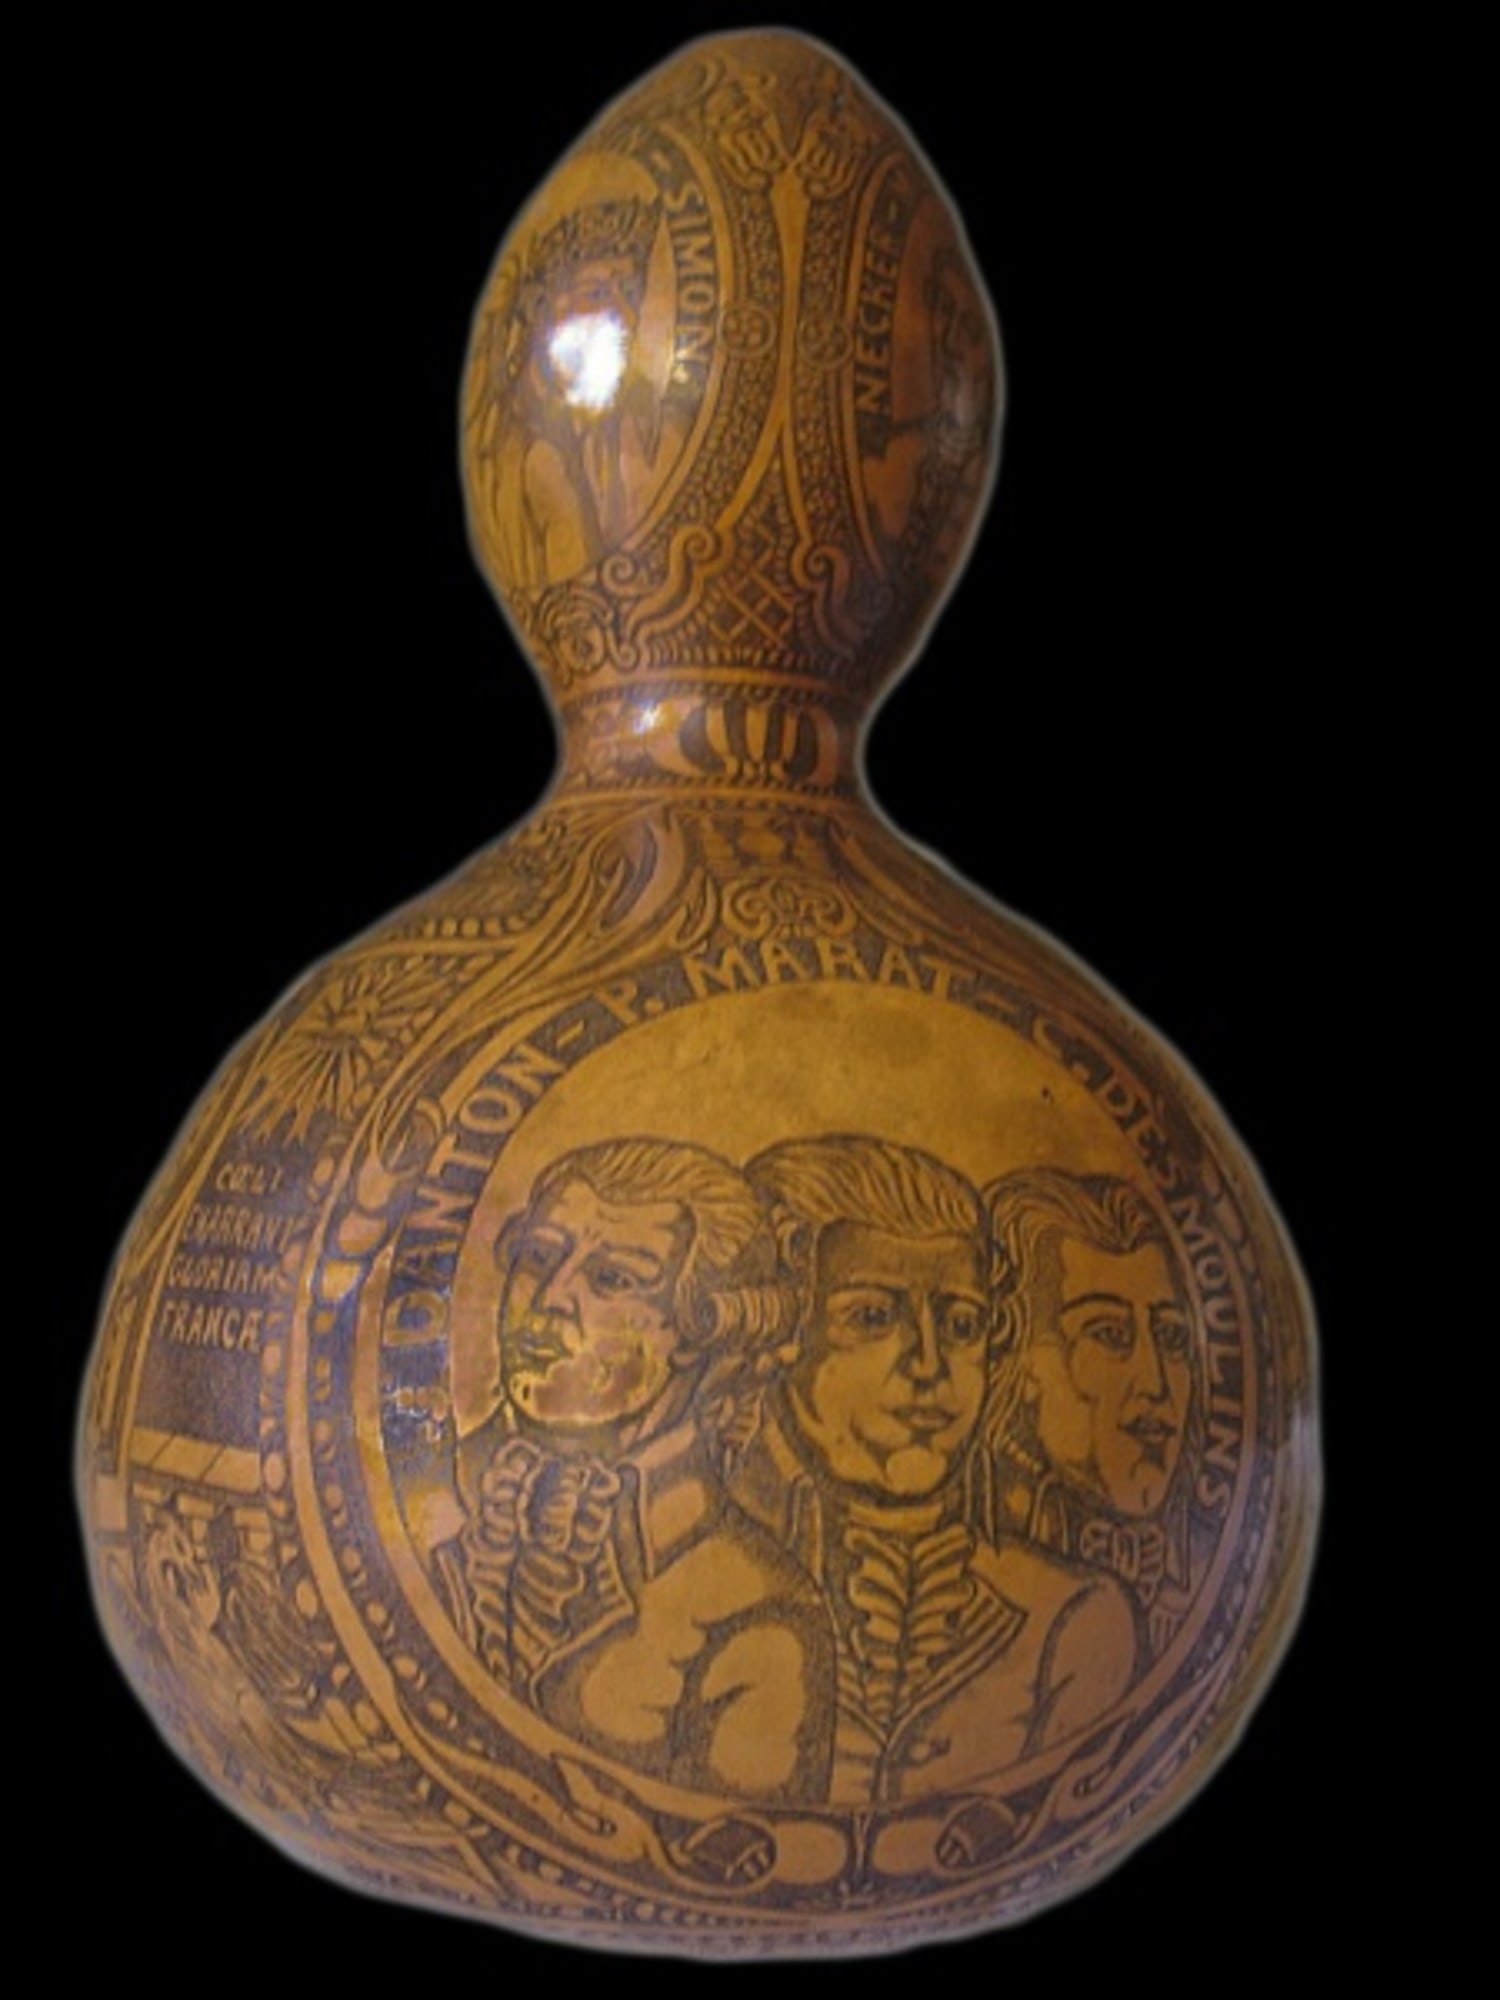 Gourd indeed holds the blood of decapitated King Louis XVI